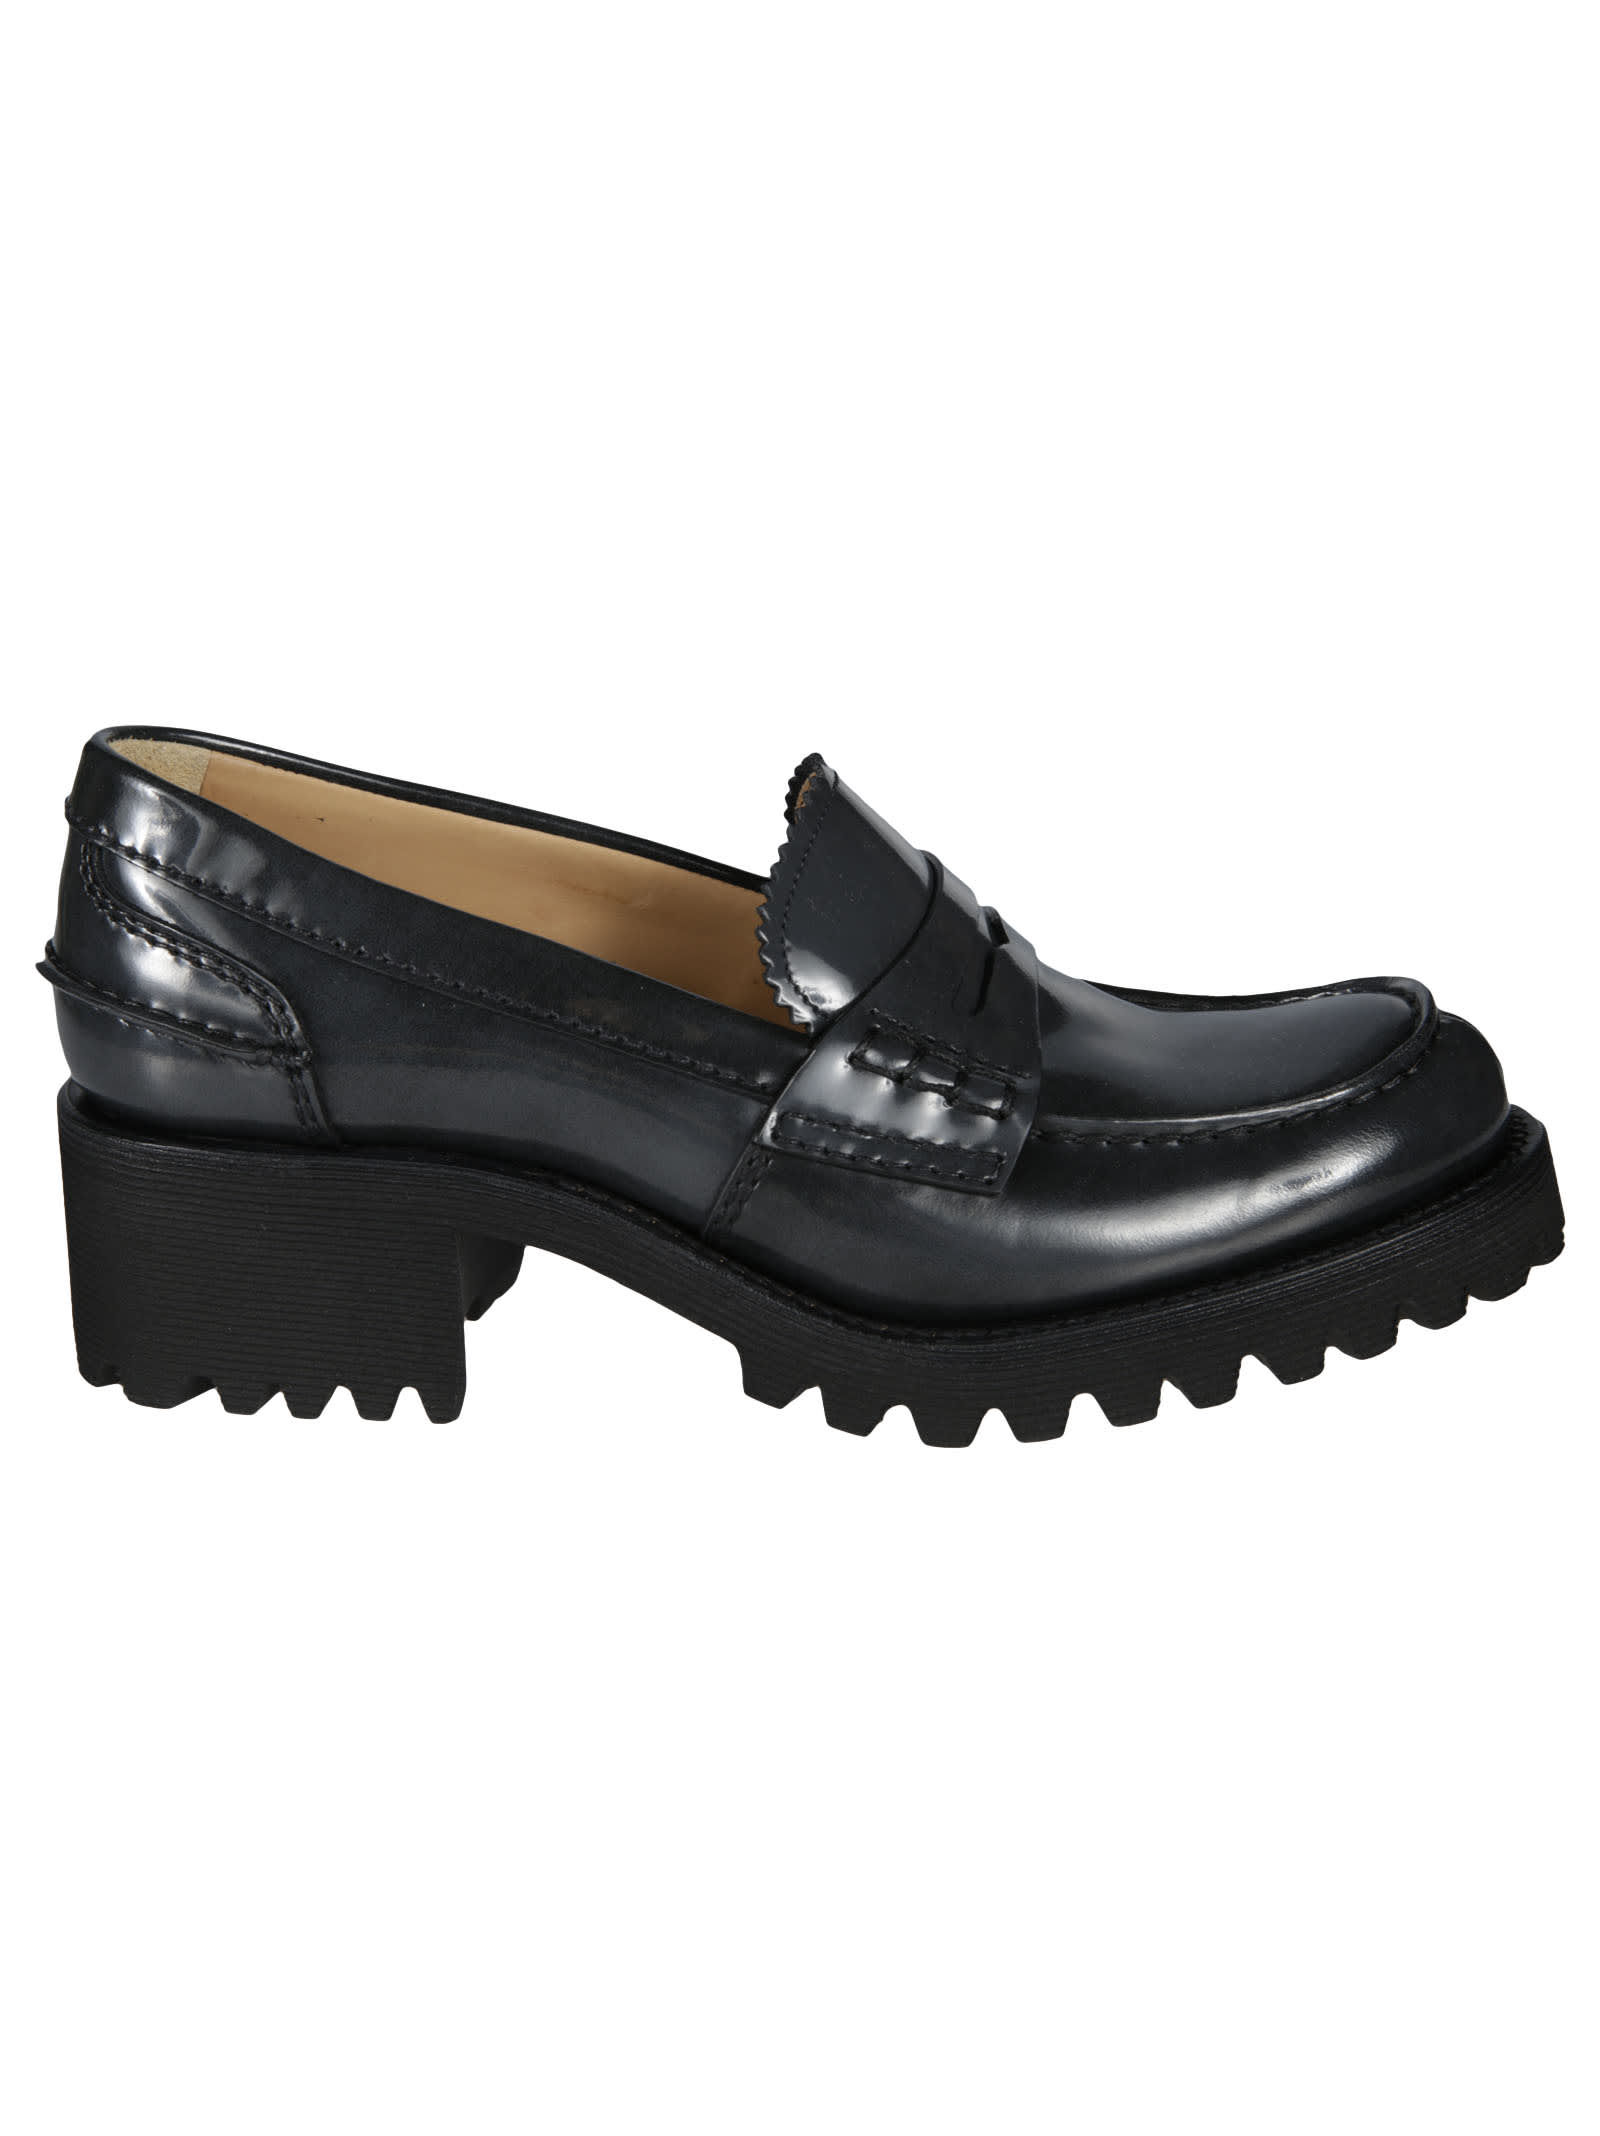 Churchs Glossy Loafers